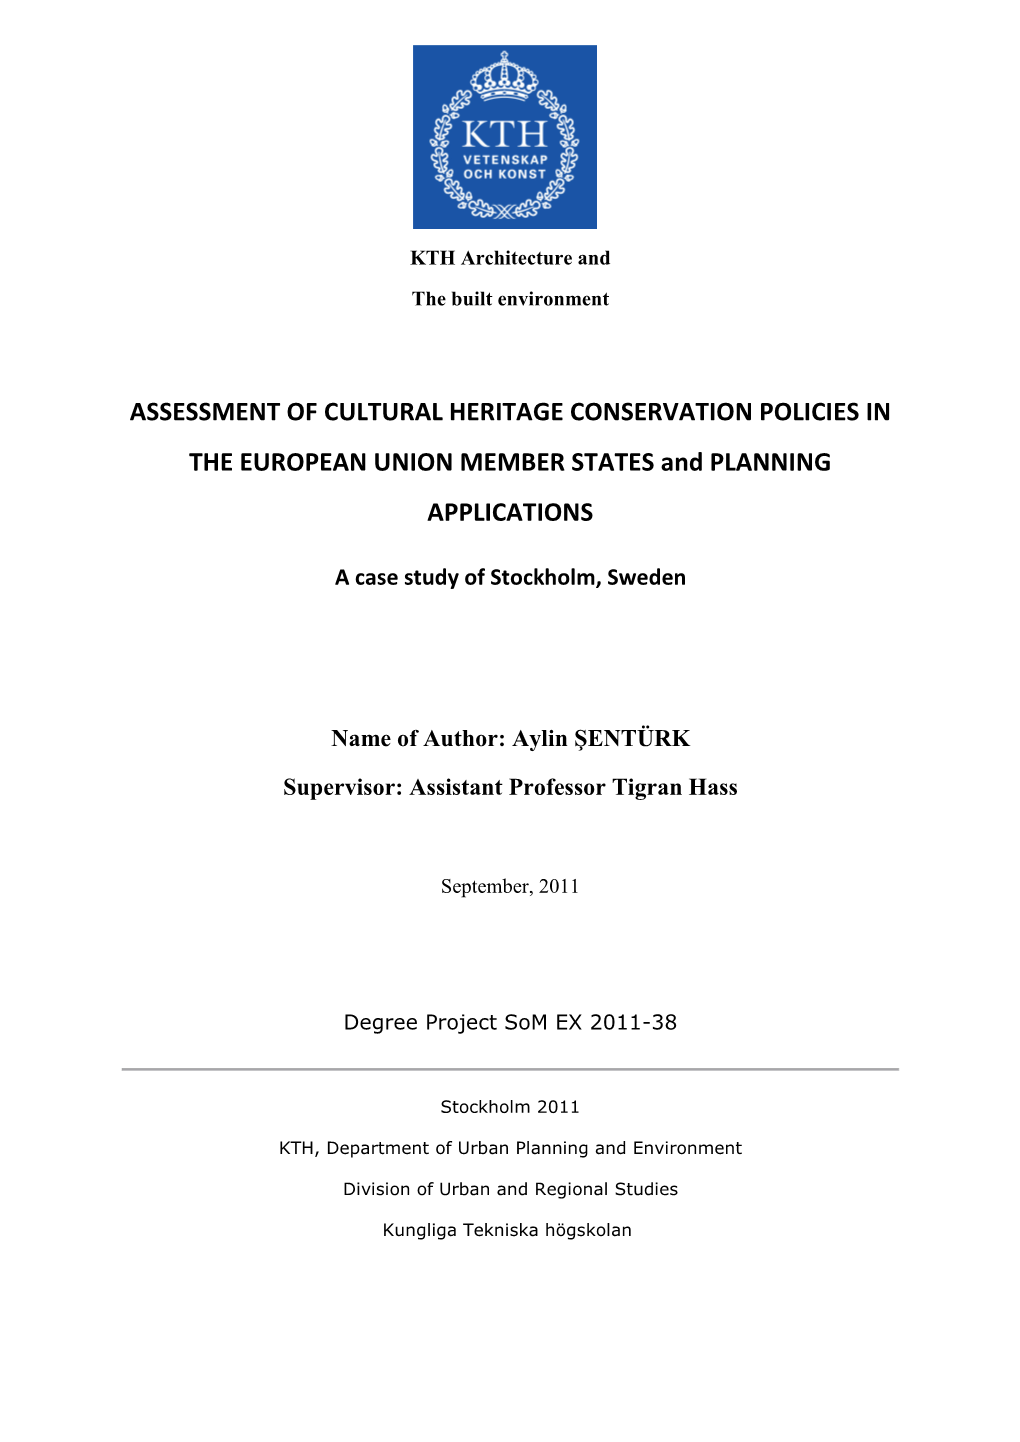 ASSESSMENT of CULTURAL HERITAGE CONSERVATION POLICIES in the EUROPEAN UNION MEMBER STATES and PLANNING APPLICATIONS